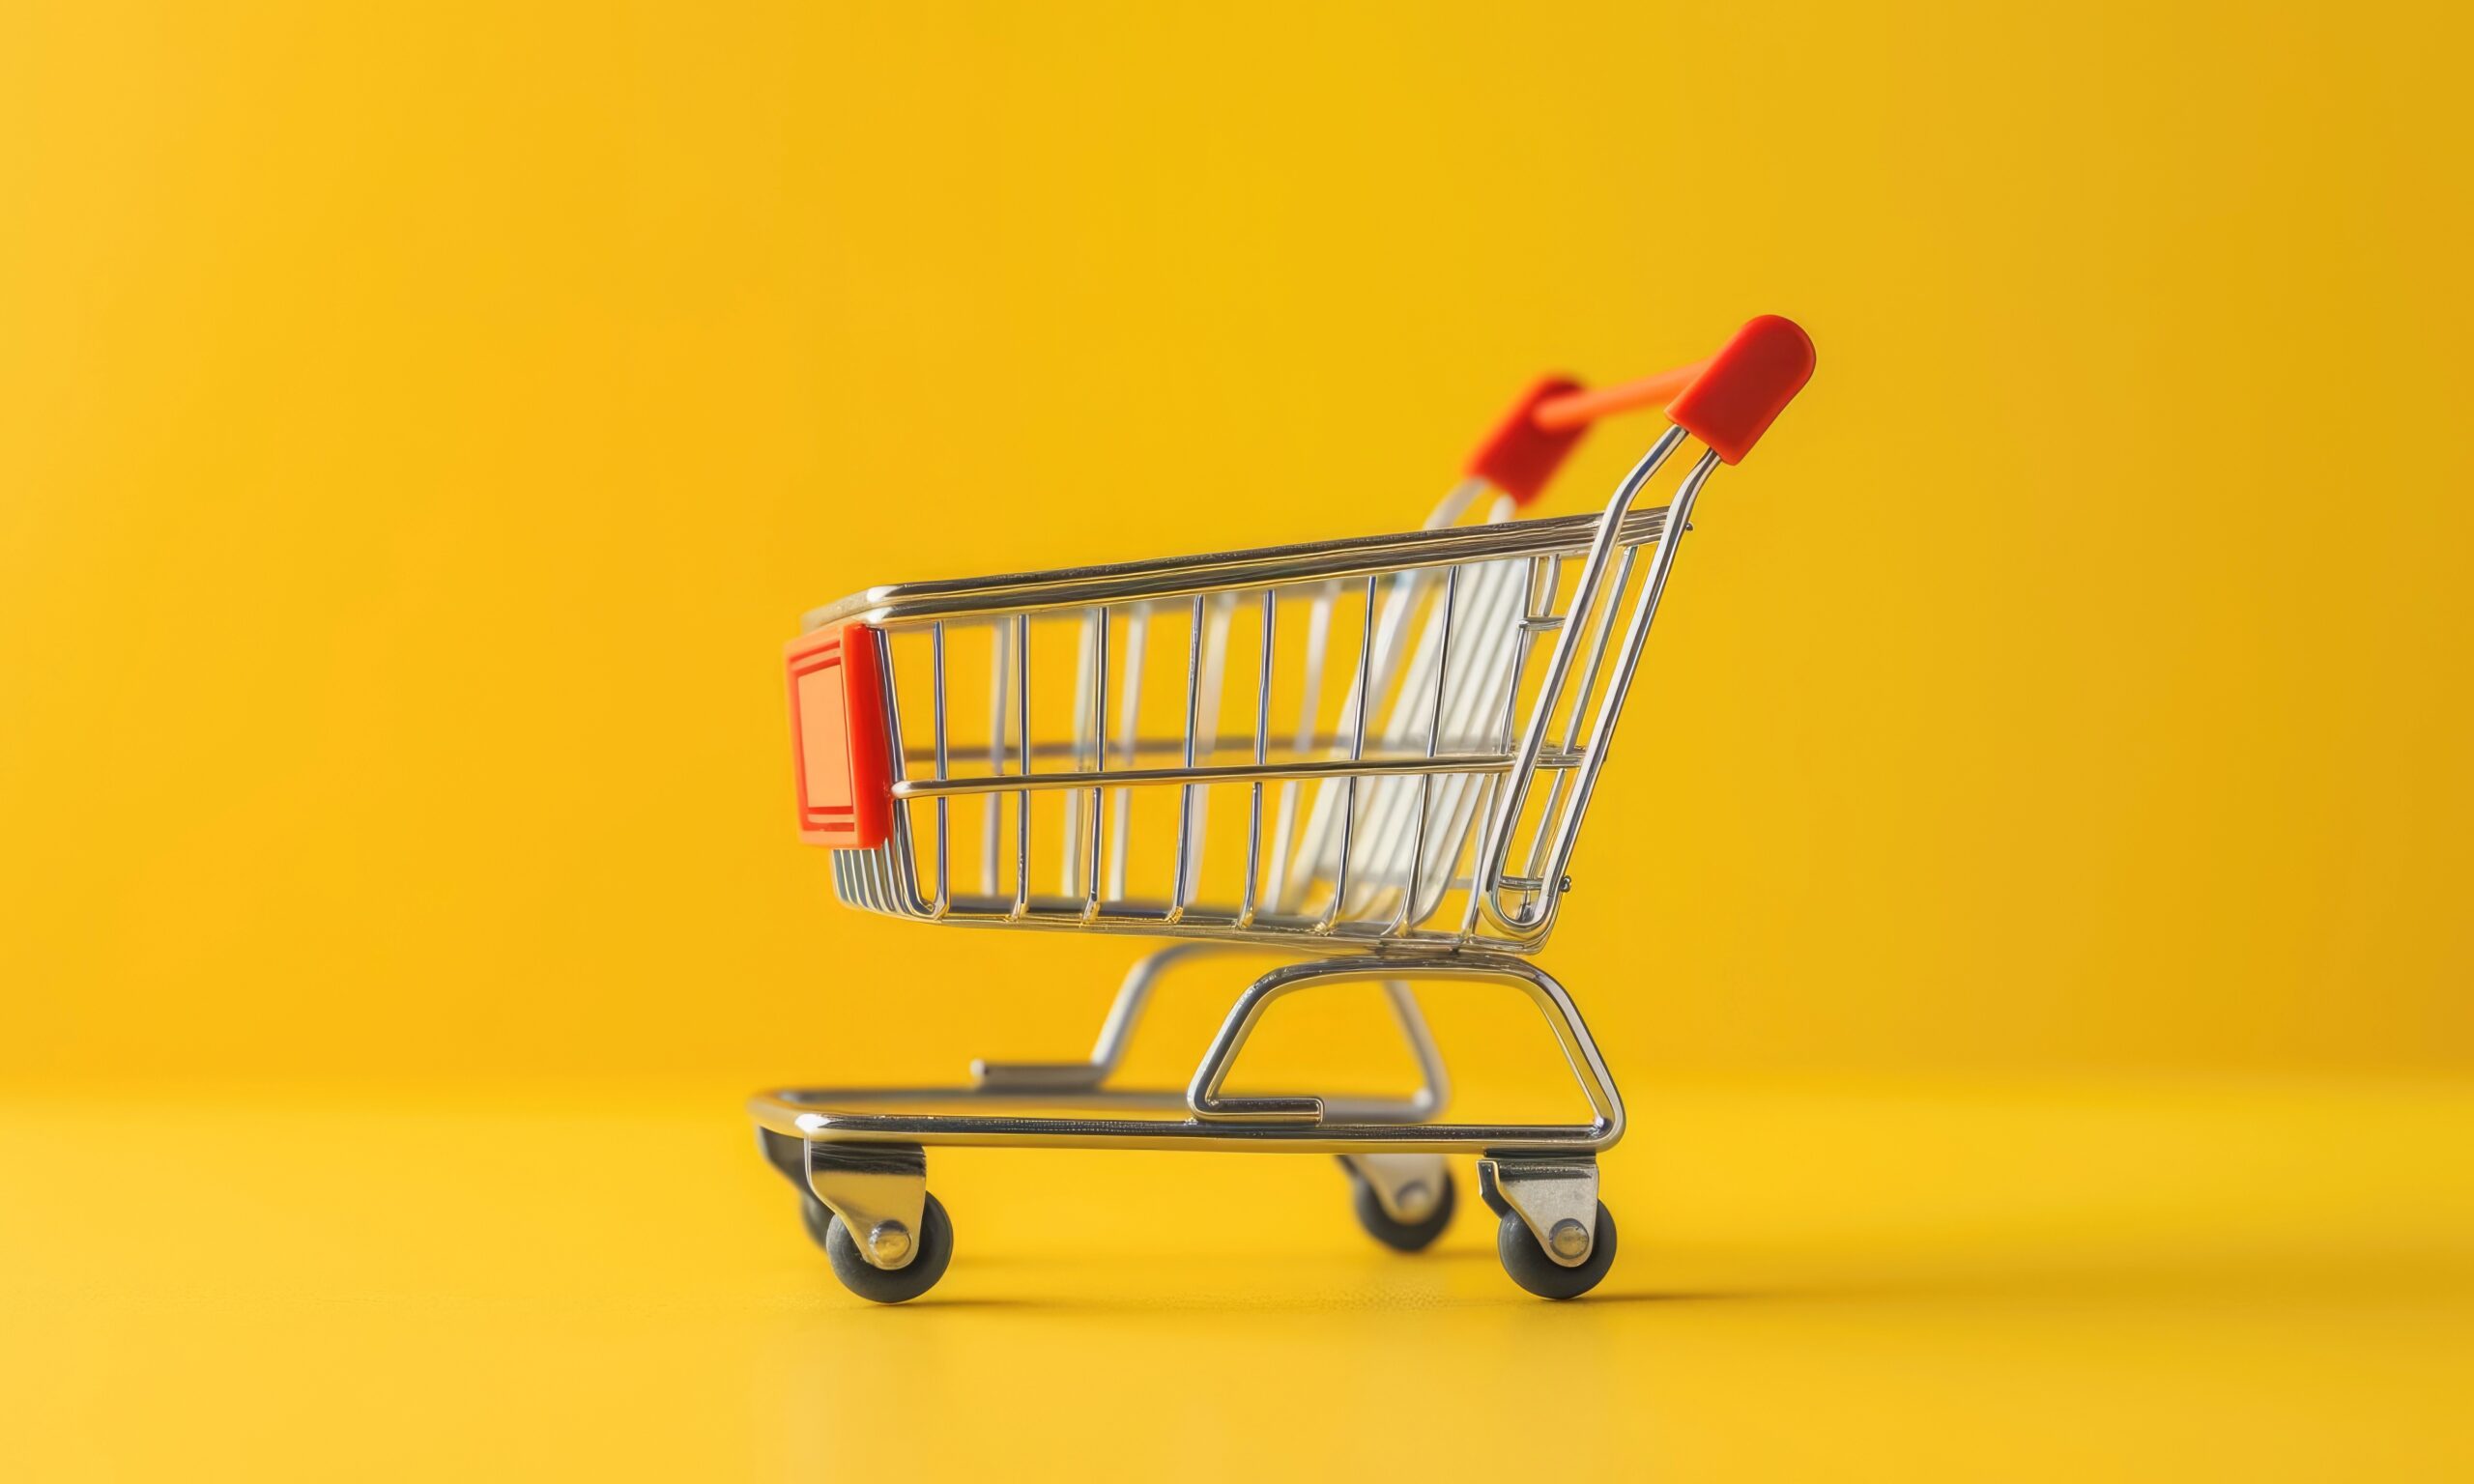 A toy metal shopping cart sits in the center of an all yellow background.